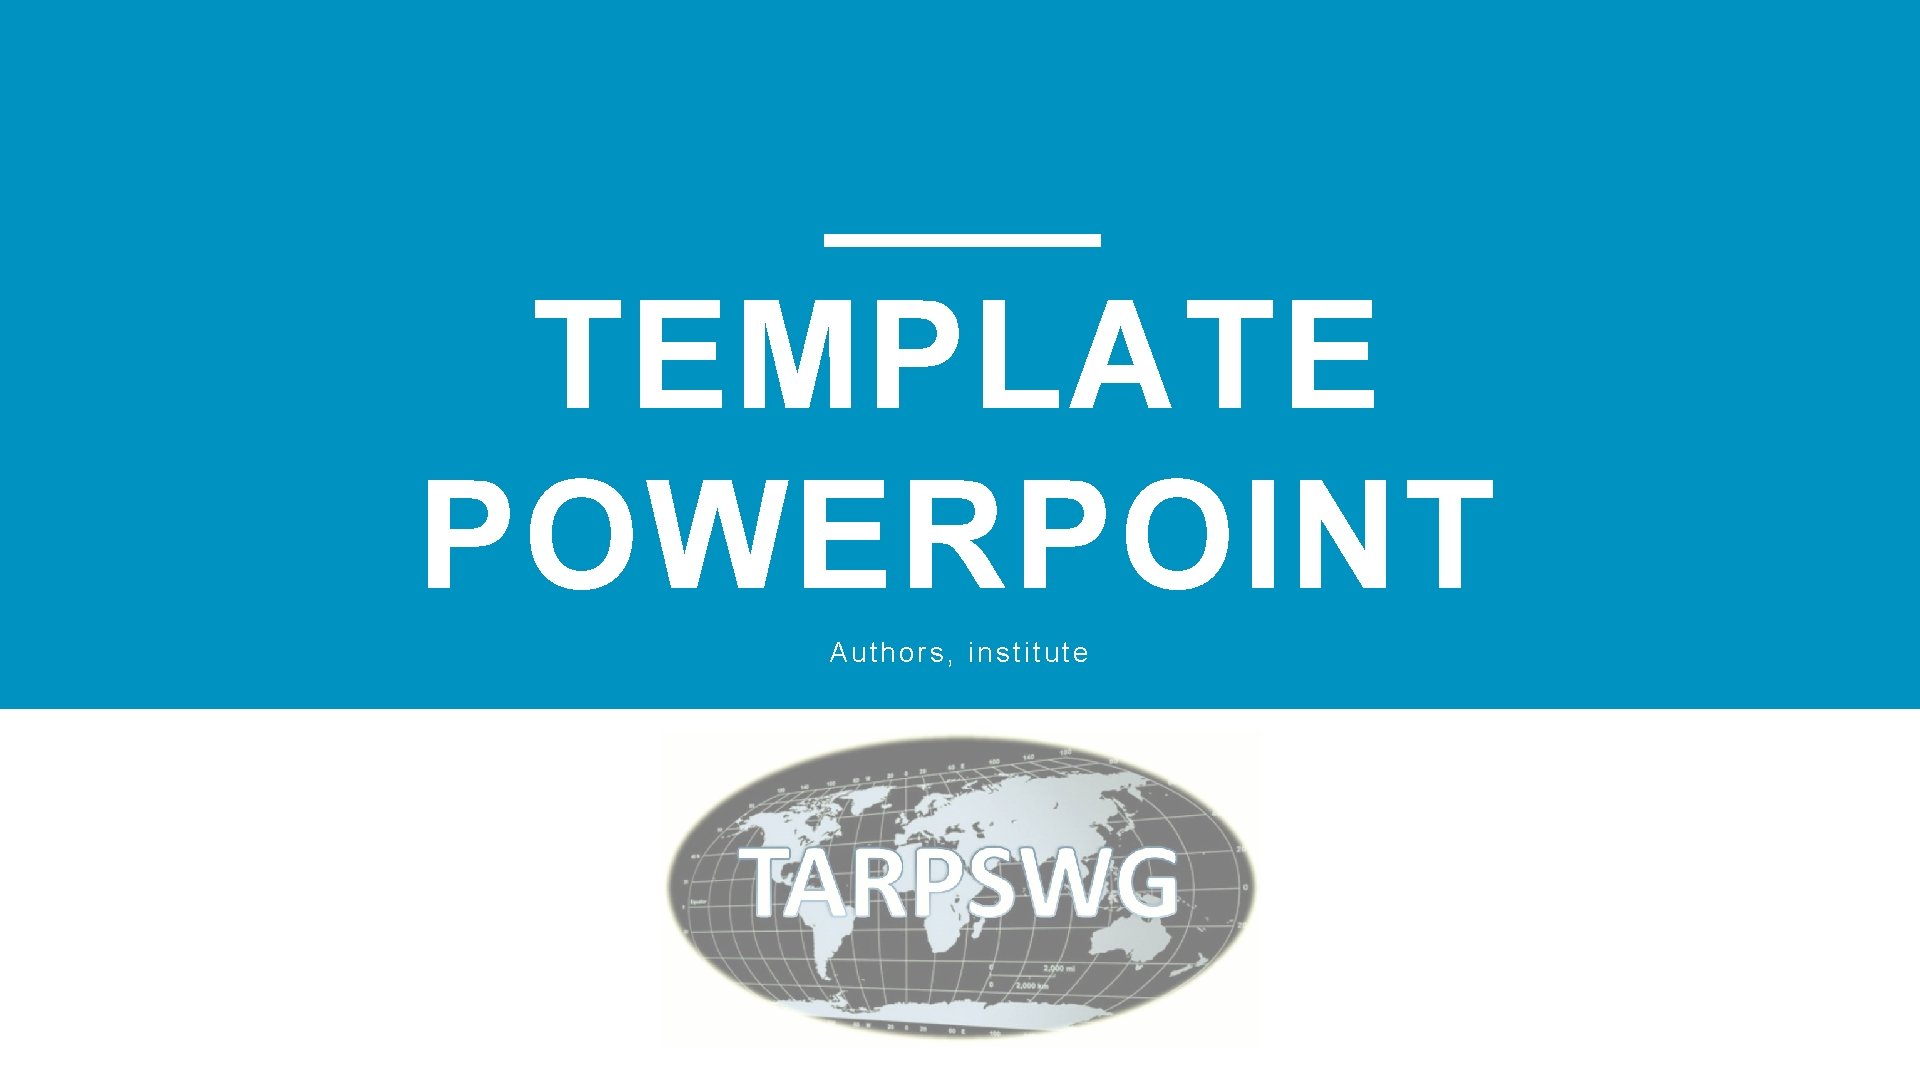 2 TEMPLATE POWERPOINT Authors, institute 